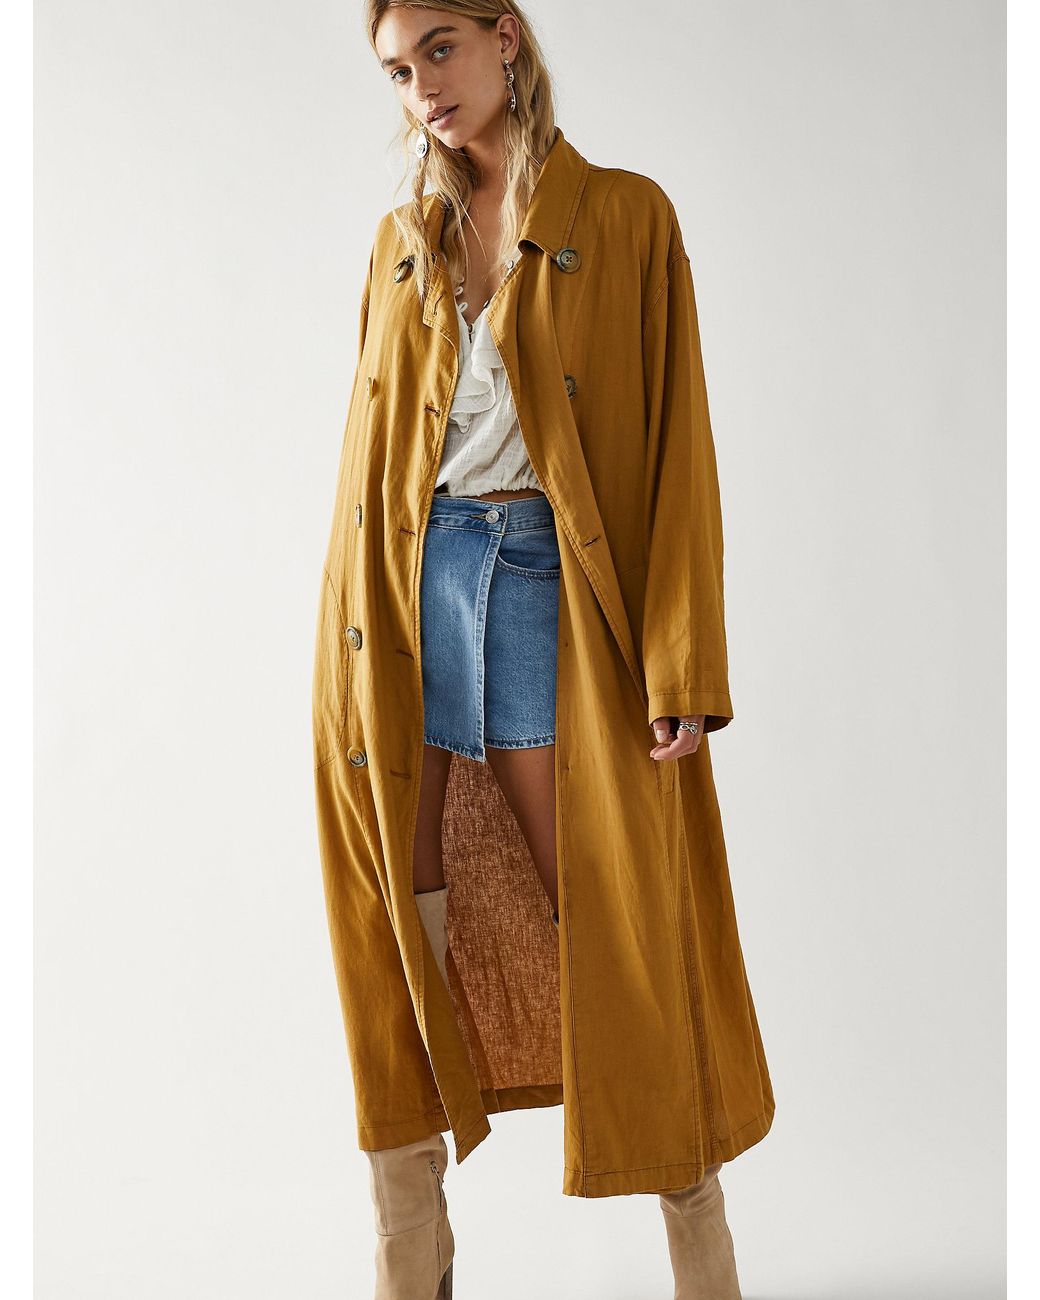 Free People Linen Sweet Melody Trench Coat | Lyst